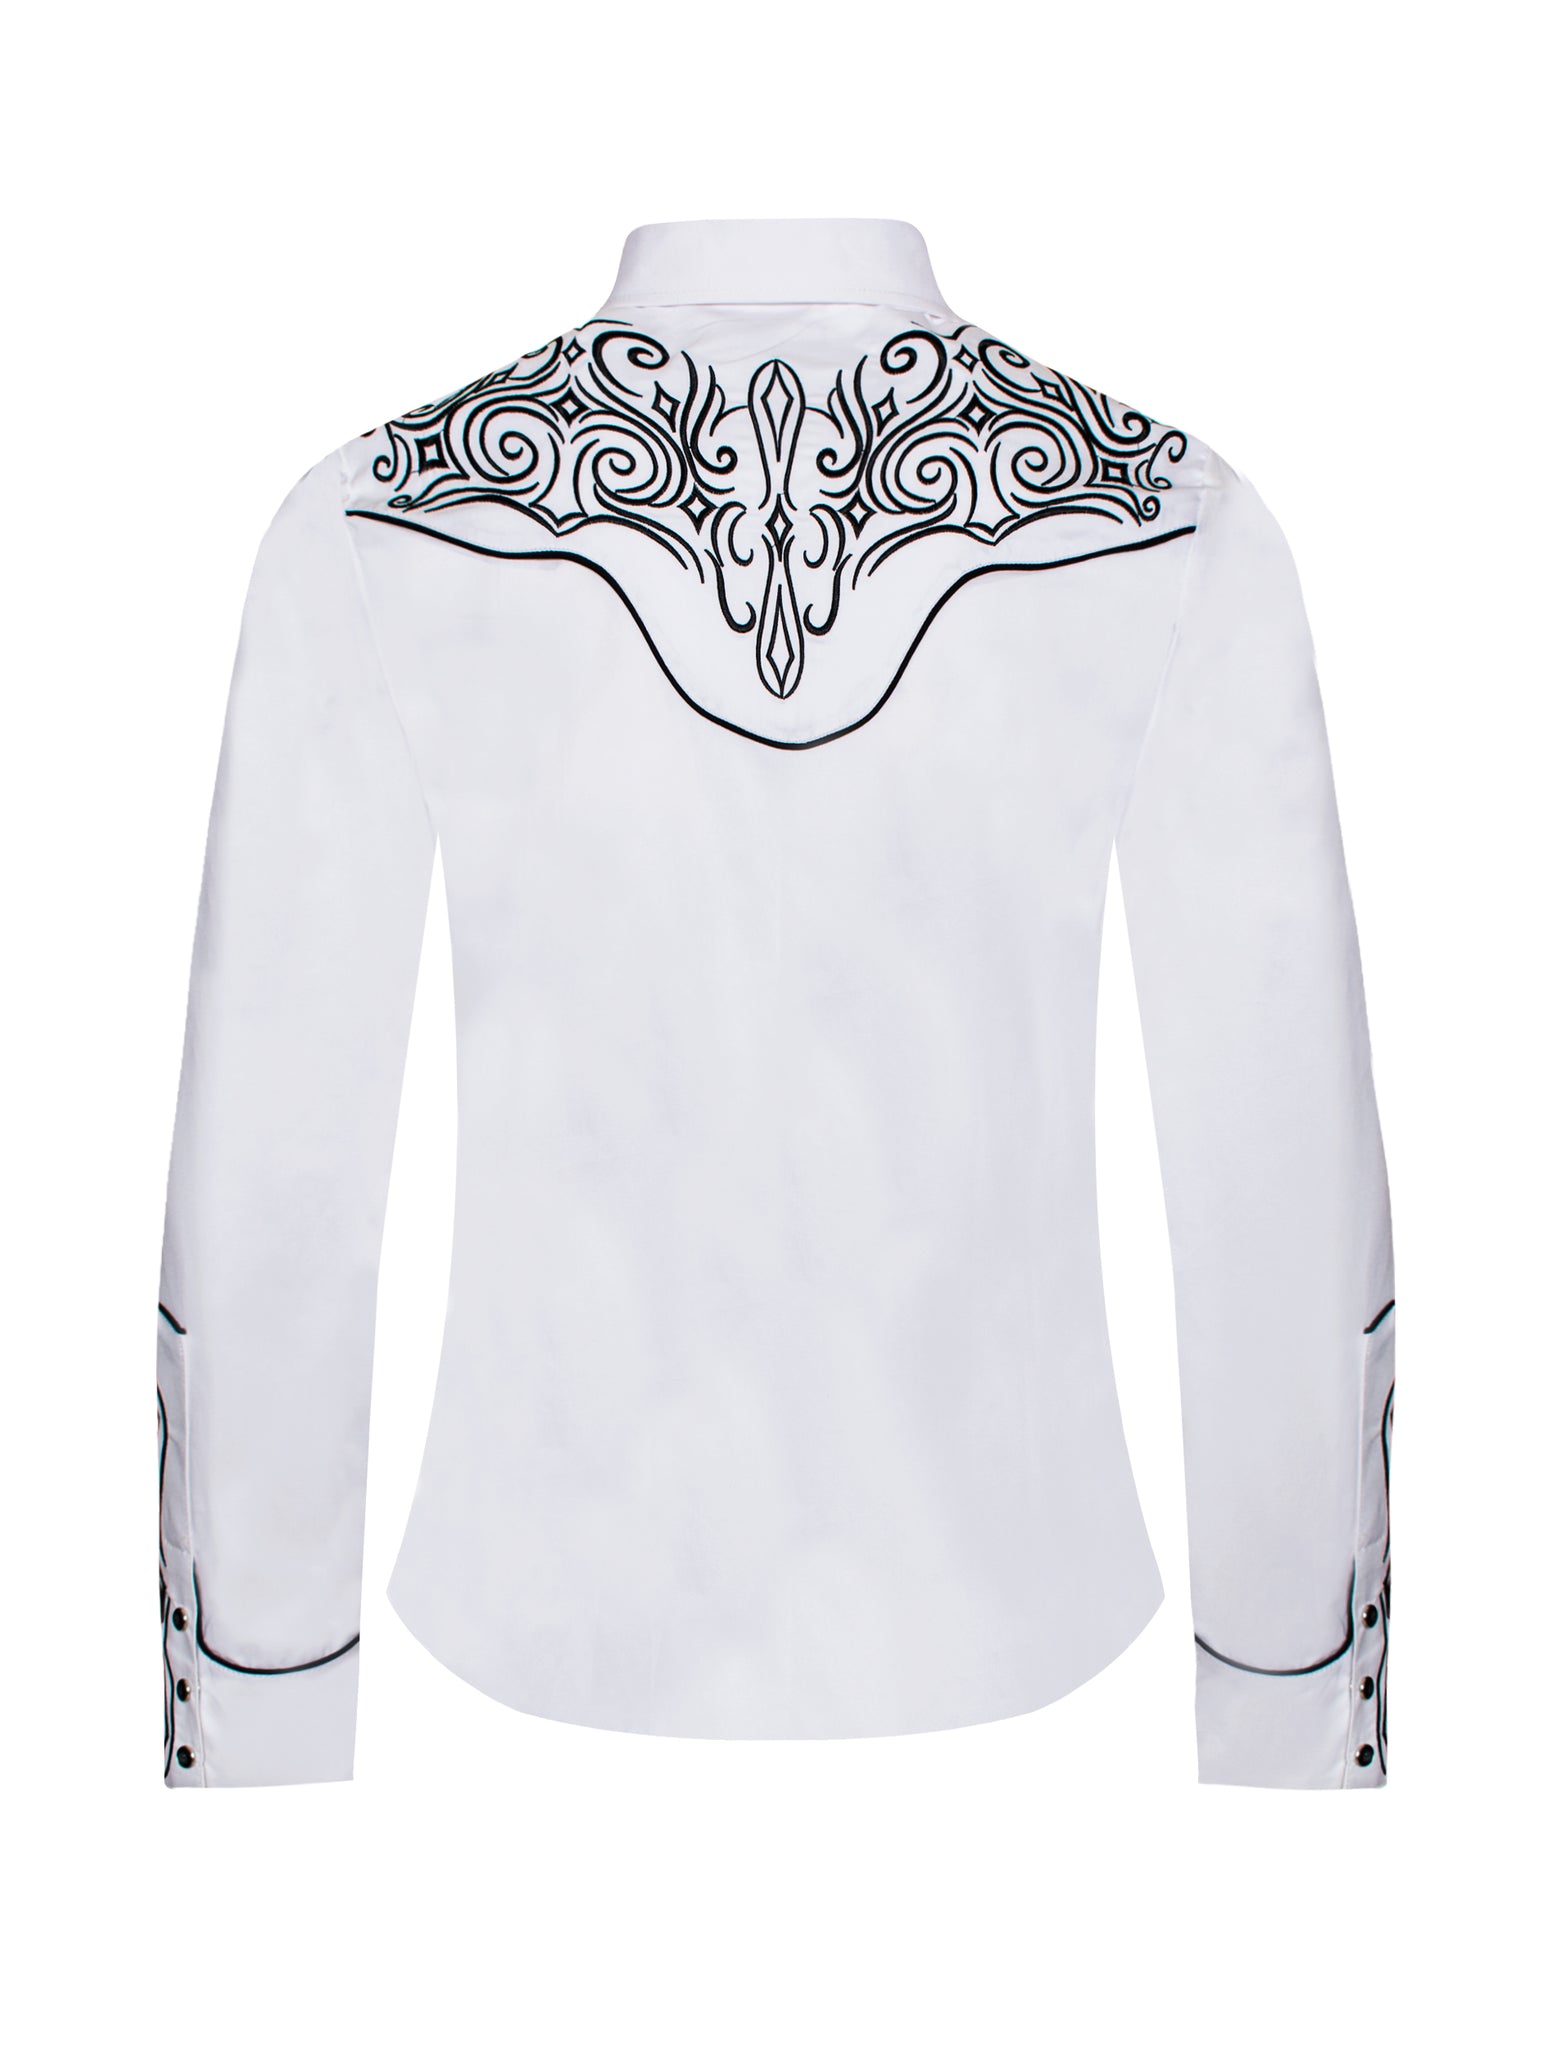 Women’s Western Embroidered Shirts-LS500-518